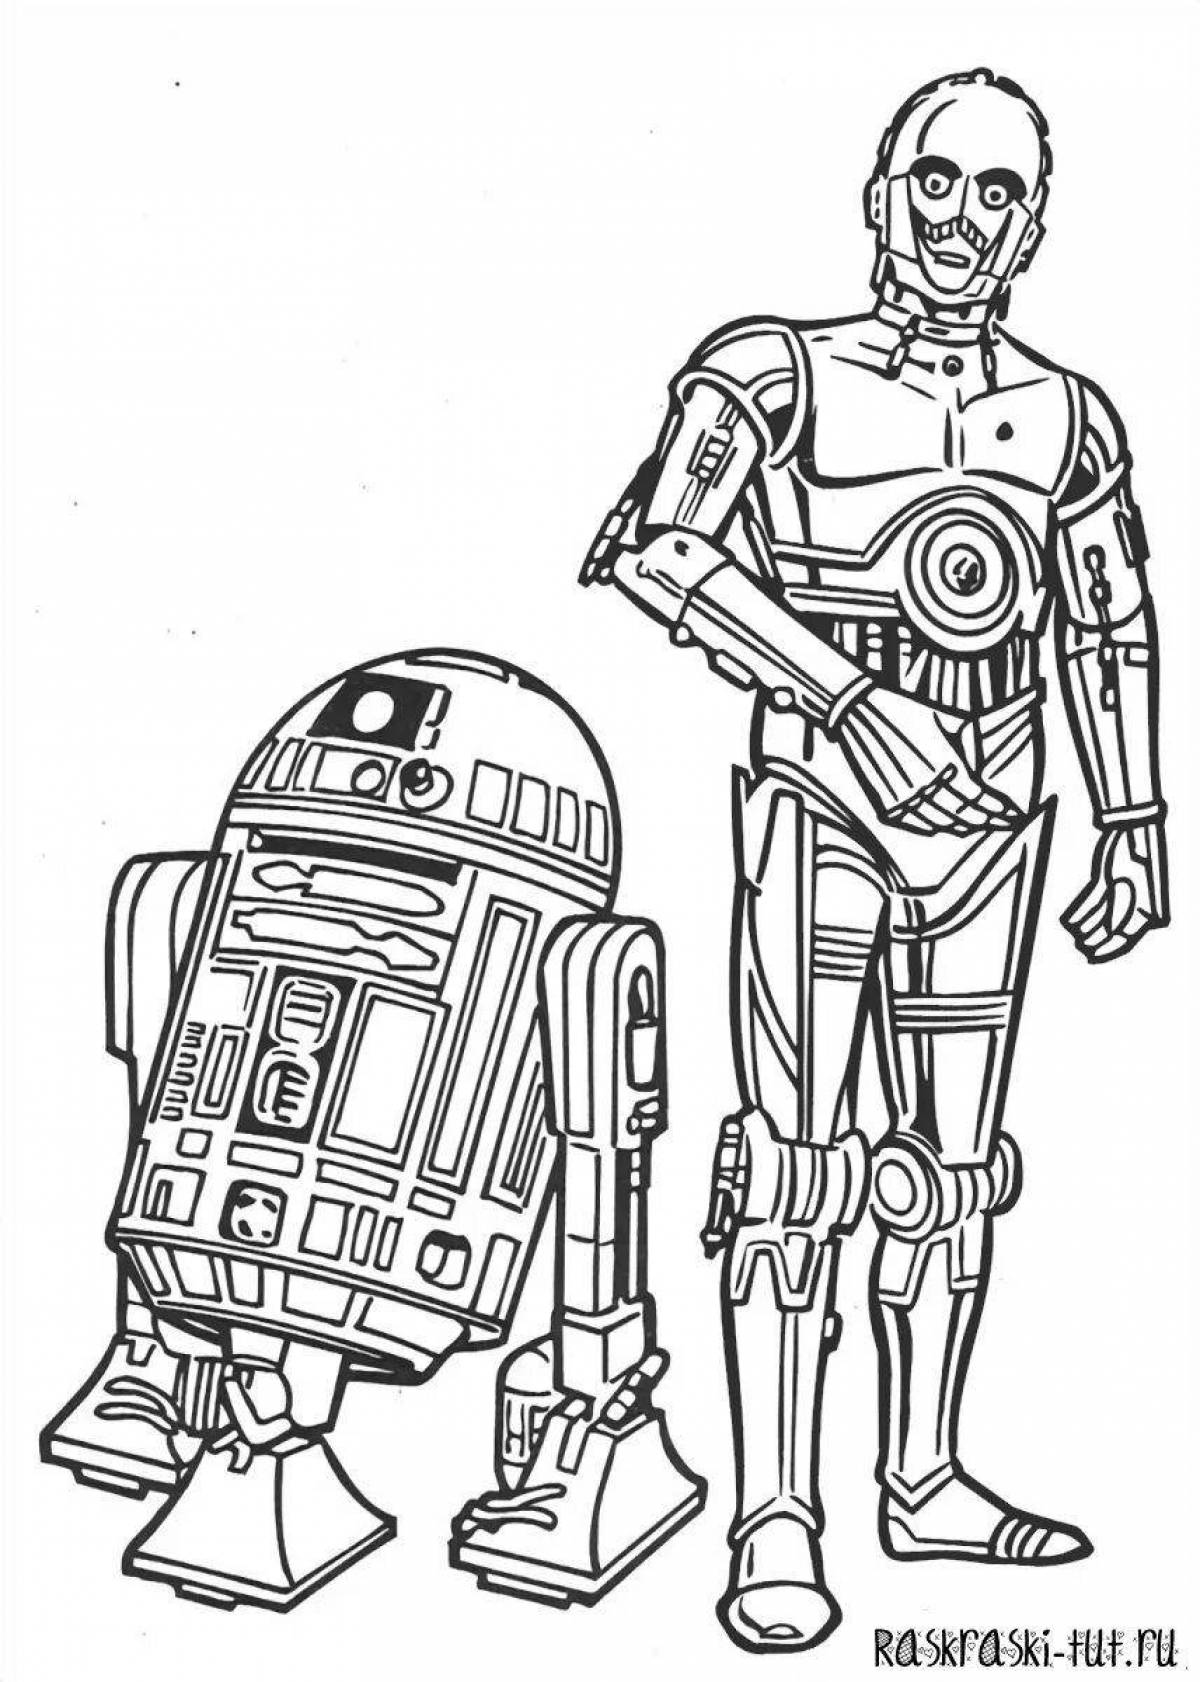 Attractive star wars coloring book for boys